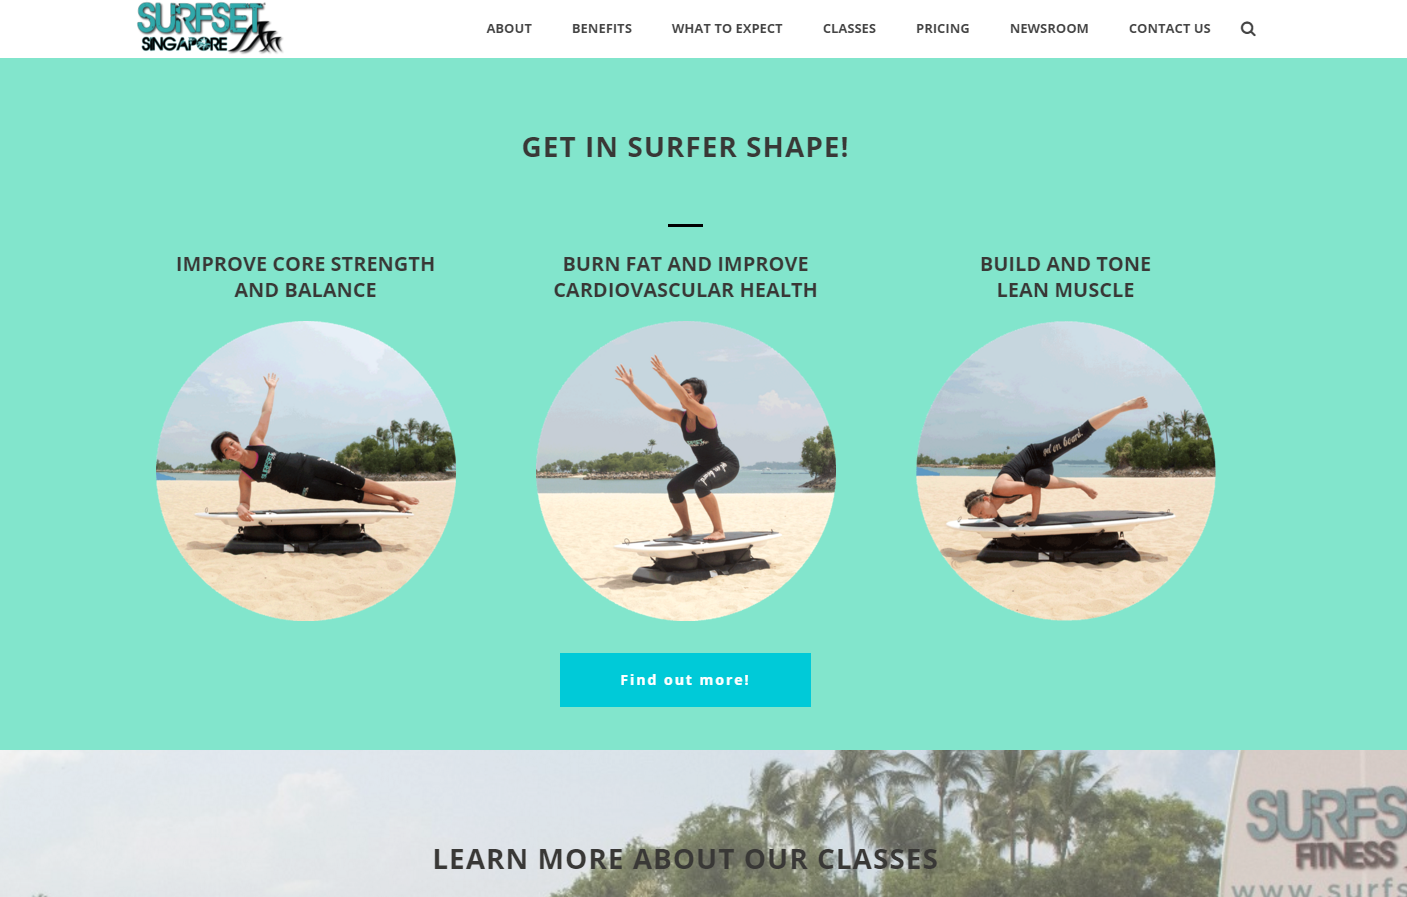 New Surfset Website core strength and balance, burn fat and improve cardiovascular health, build and tone lean muscle